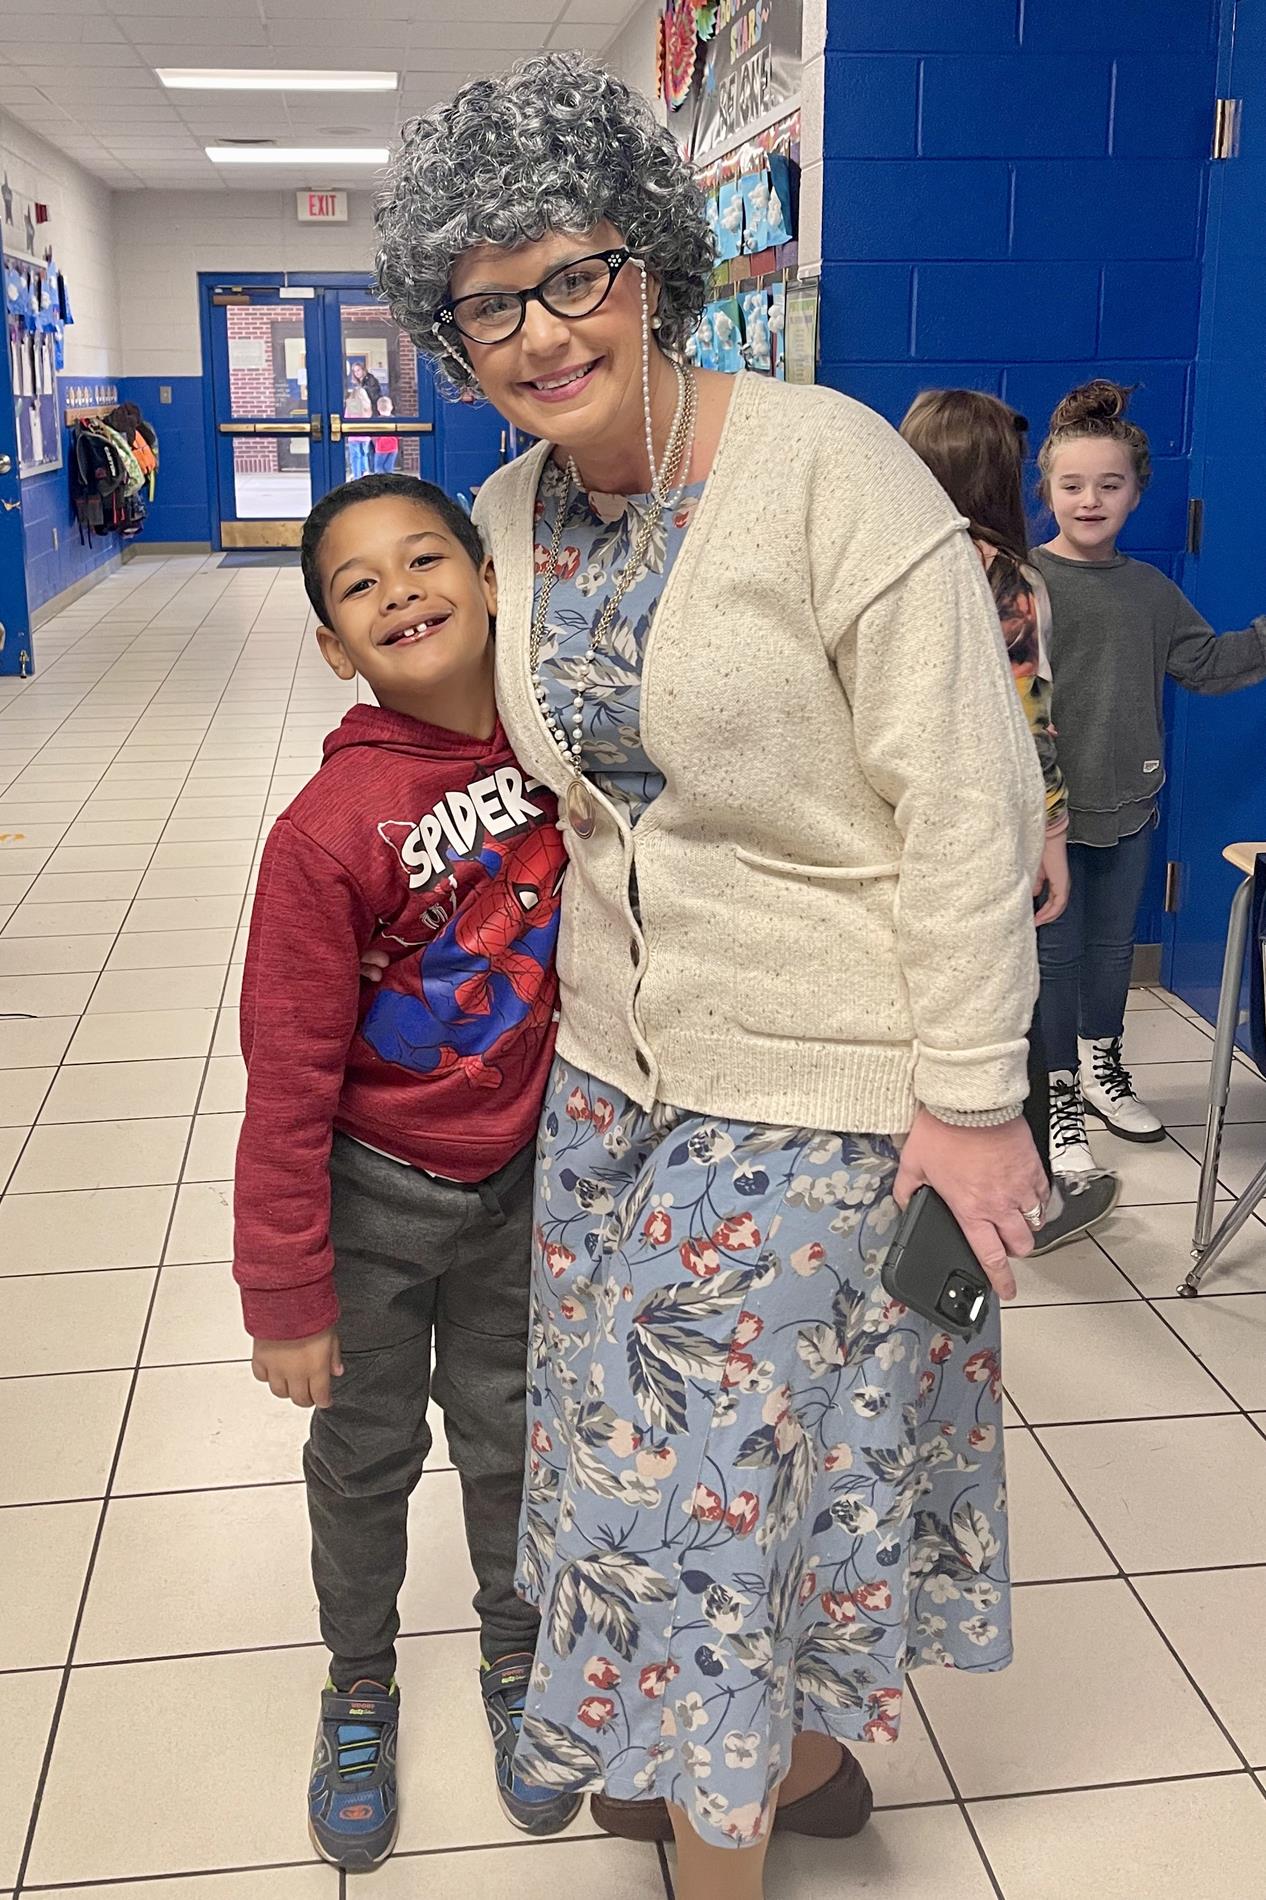 Principal and student on 100th day